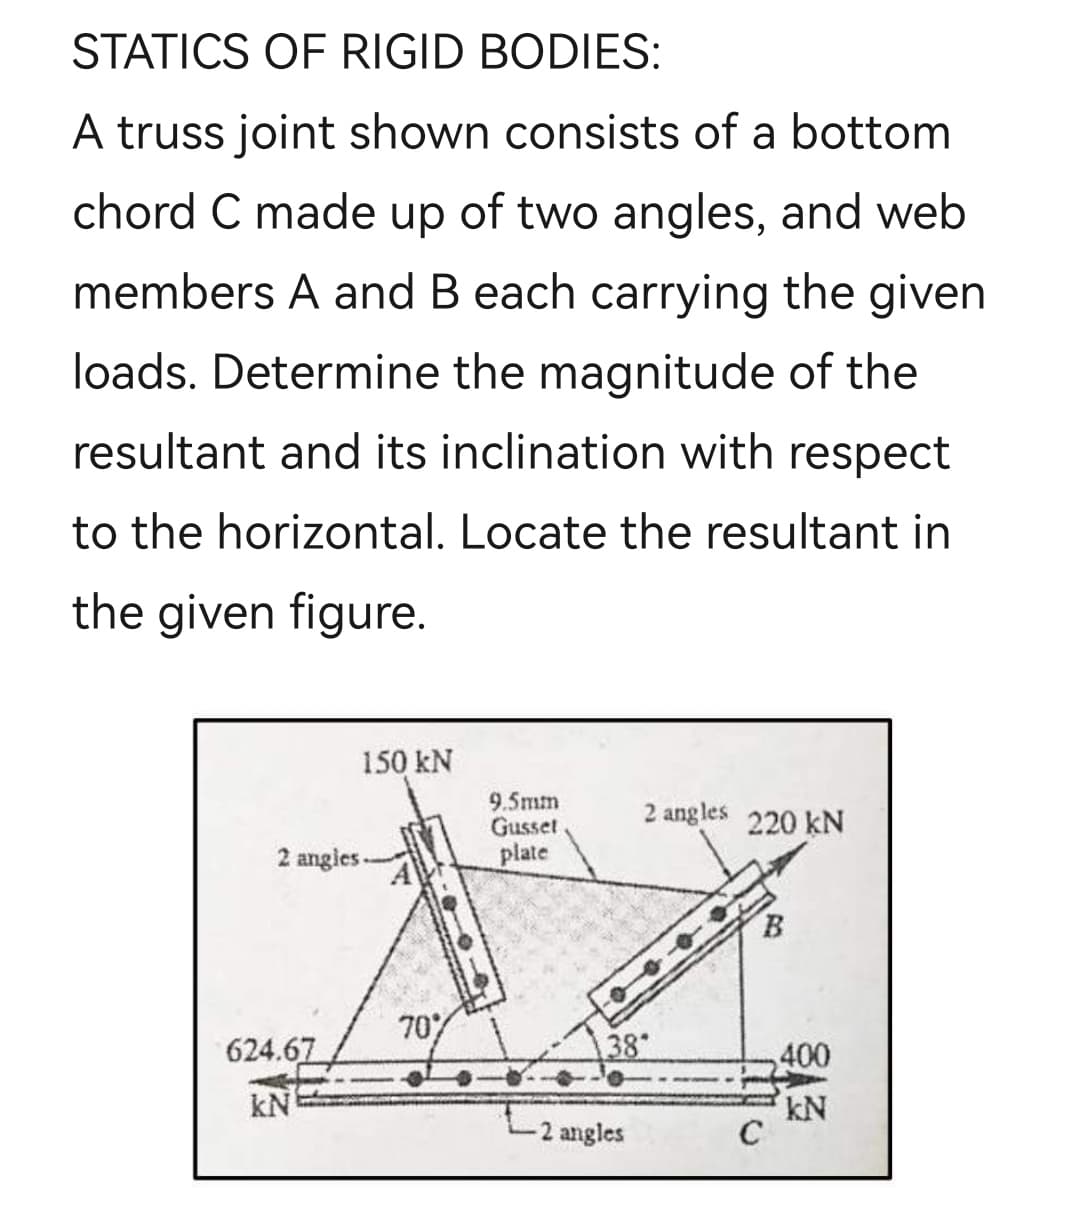 STATICS OF RIGID BODIES:
A truss joint shown consists of a bottom
chord C made up of two angles, and web
members A and B each carrying the given
loads. Determine the magnitude of the
resultant and its inclination with respect
to the horizontal. Locate the resultant in
the given figure.
150 kN
9.5mm
Gusset
plate
2 angles 220 kN
2 angies-
B.
70%
624.67
38
400
kN
kN
C
2 angles
